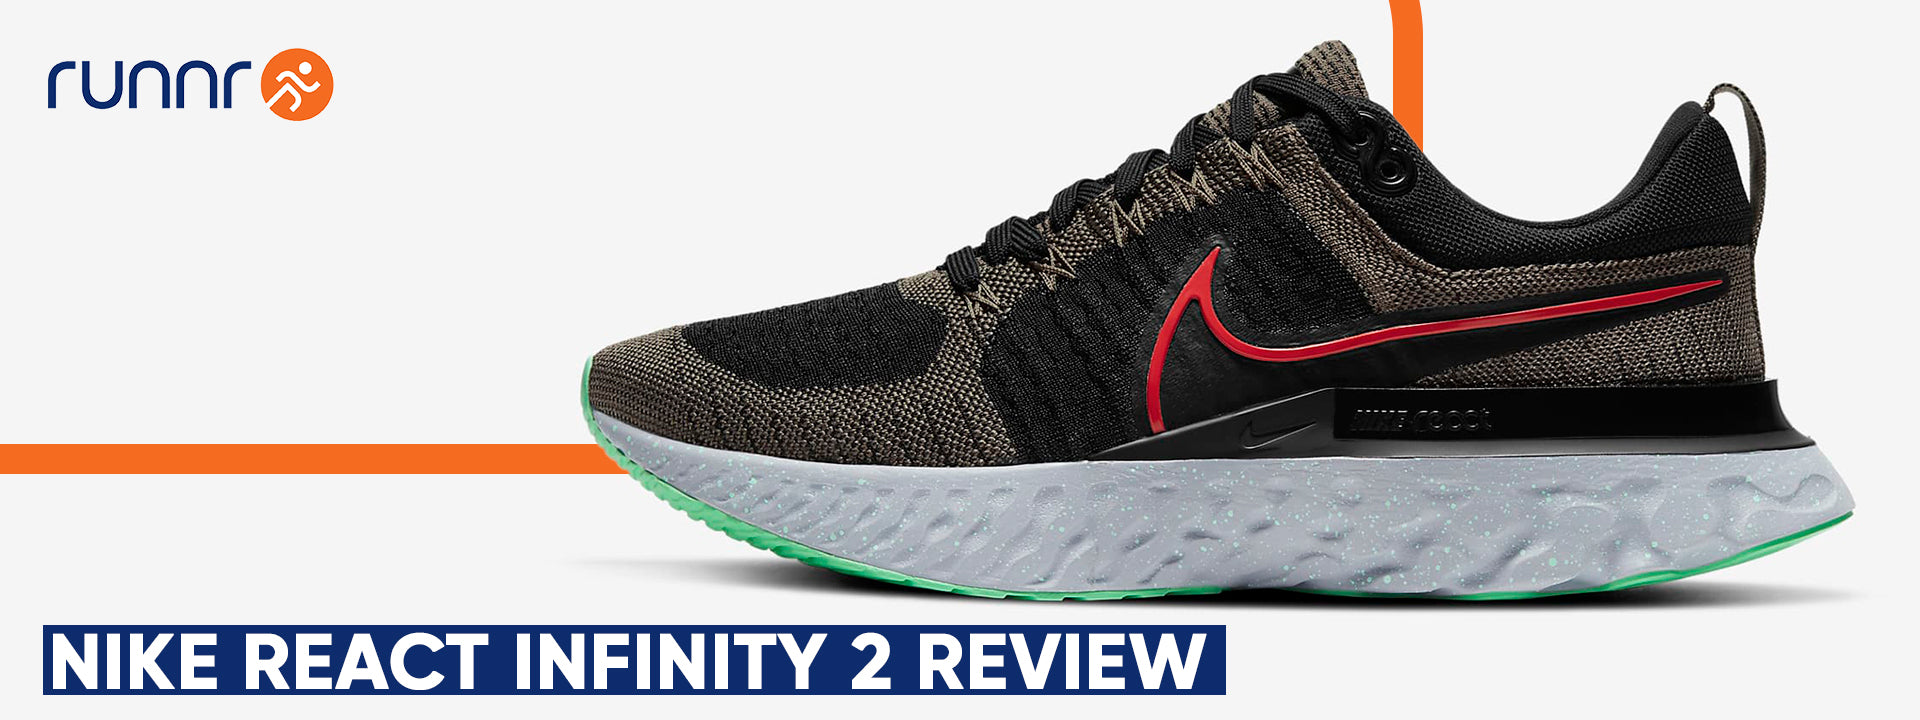 Nike React Infinity Run Flyknit 3 Review: To Infinity and Beyond